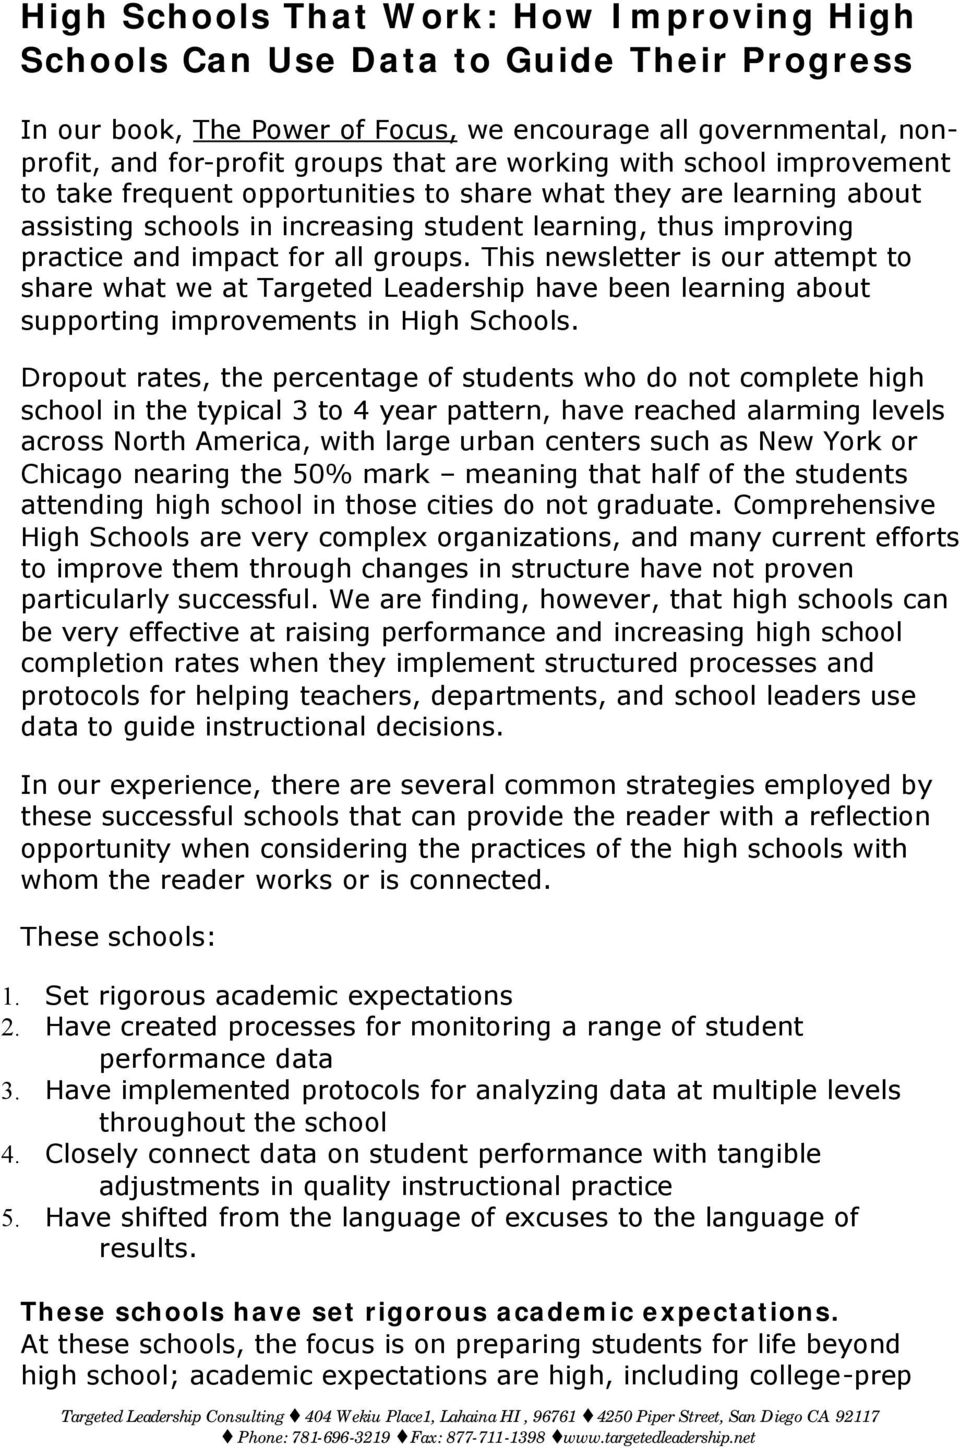 groups. This newsletter is our attempt to share what we at Targeted Leadership have been learning about supporting improvements in High Schools.